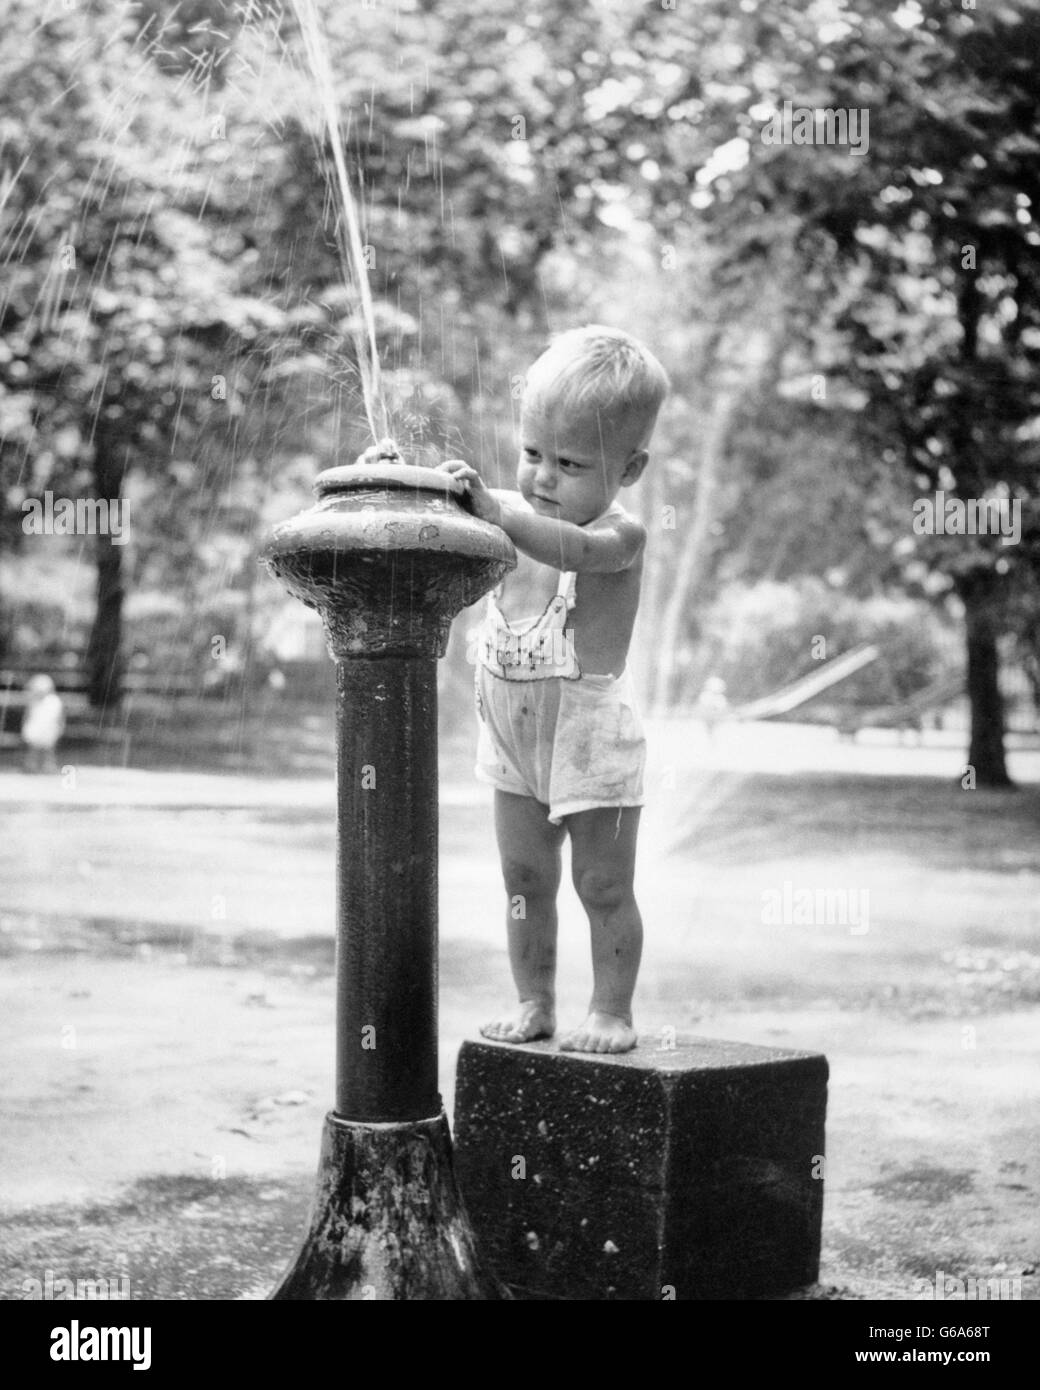 1950s LITTLE BOY PLAYING IN WATER DRINKING FOUNTAIN CENTRAL PARK NYC USA Stock Photo